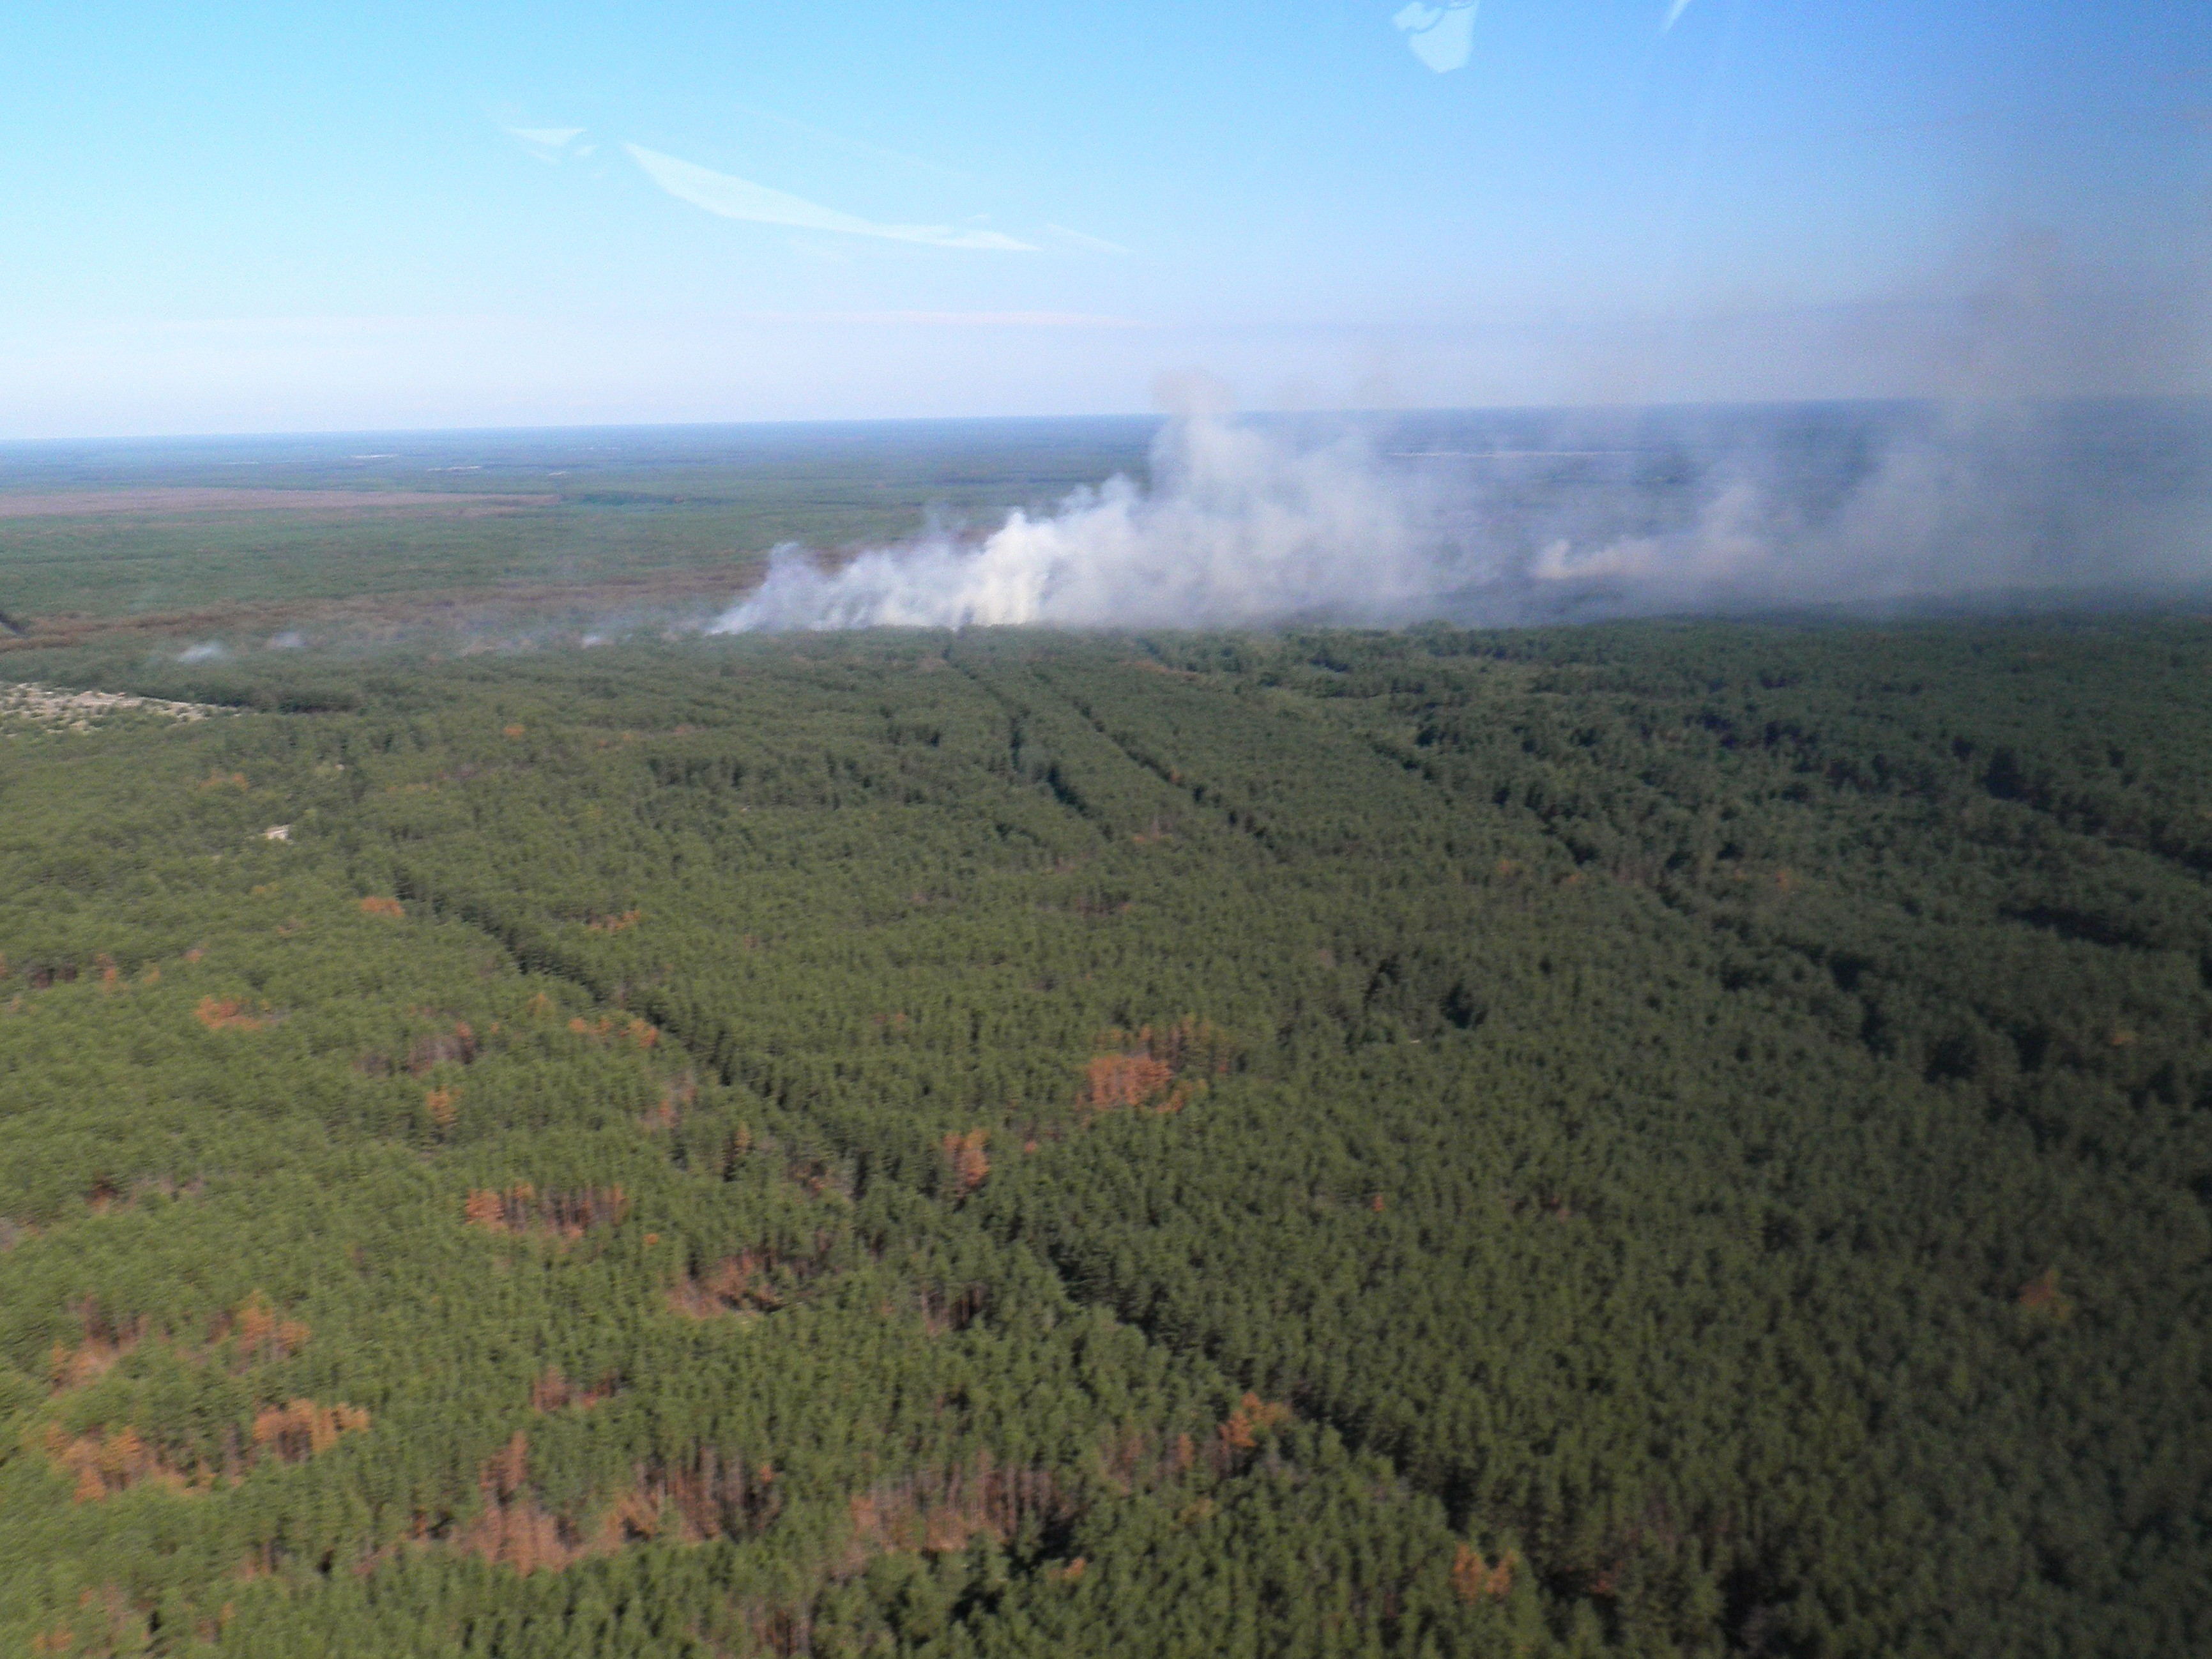 A forest fire broke out in the Chornobyl zone on June 29, and is still burning but poses no threat to the disaster-struck nuclear plant, firefighters said on June 30.